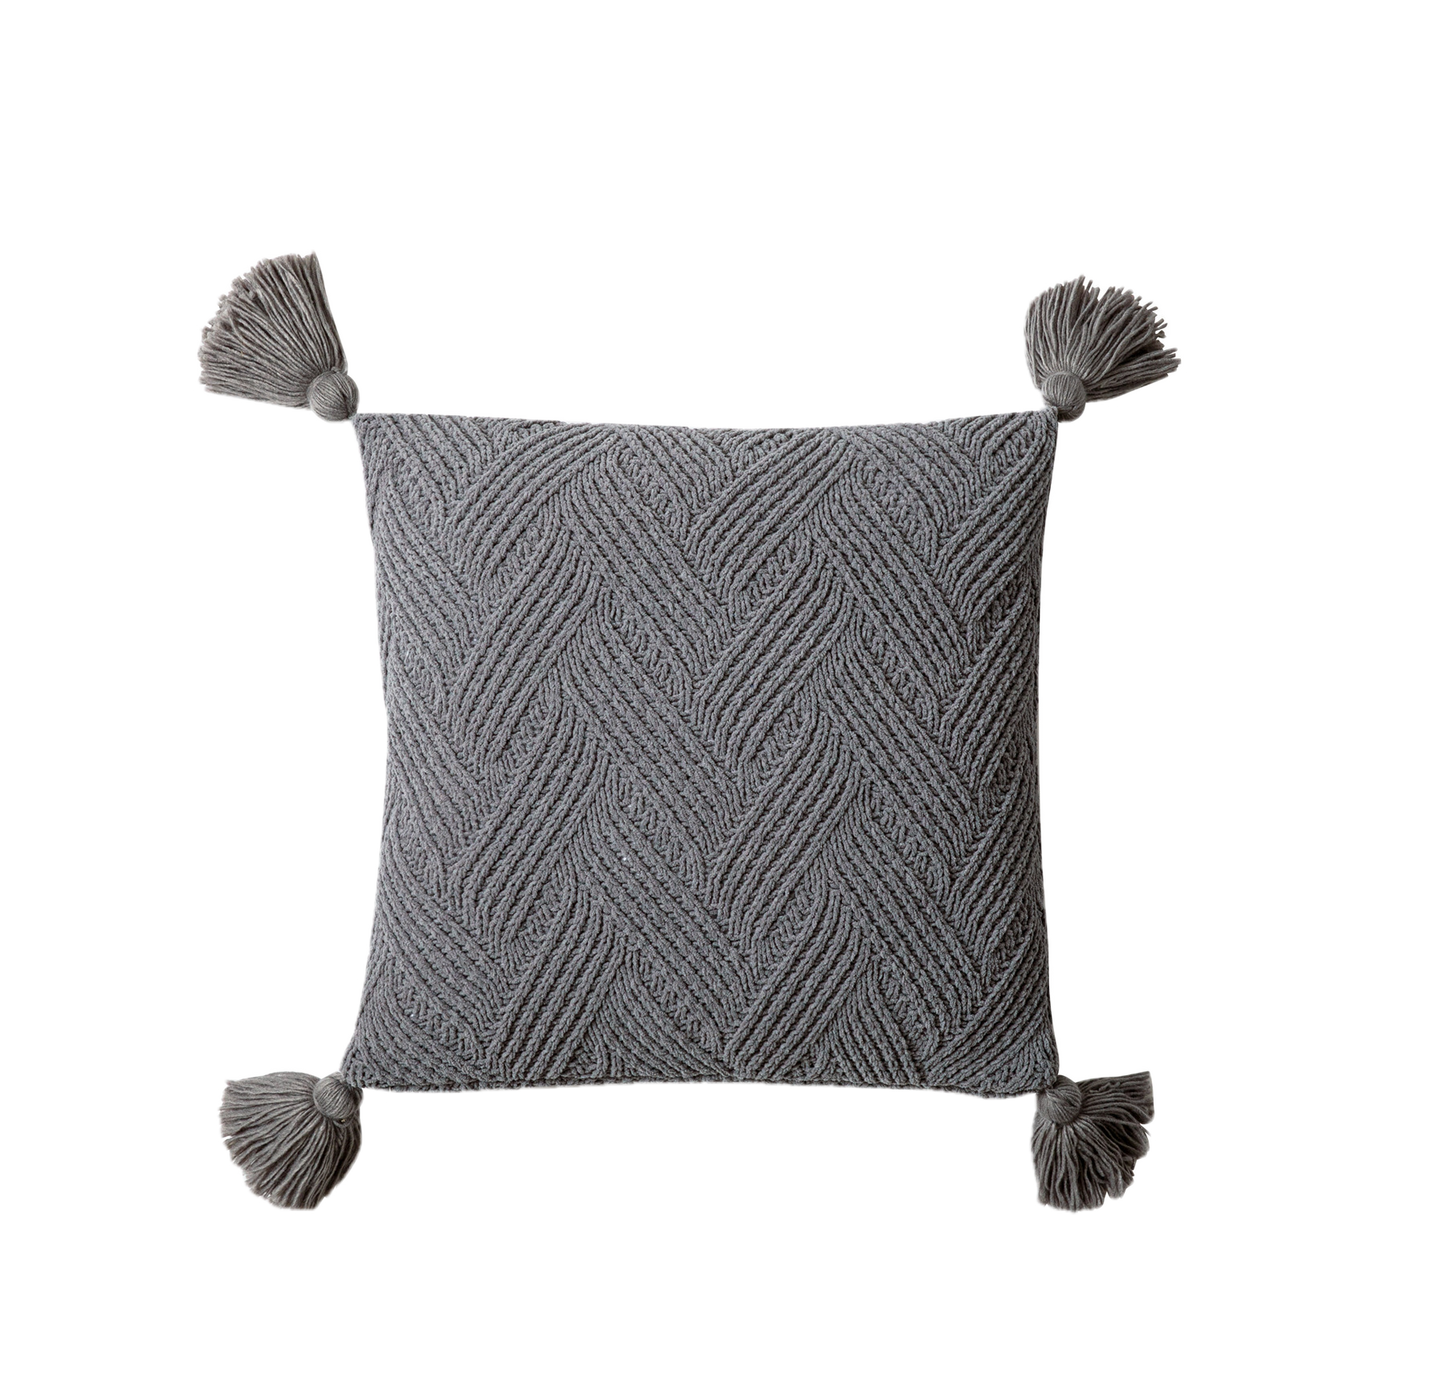 Knotted Pillow Covers 18x18 inch with Sliver Woven Pattern